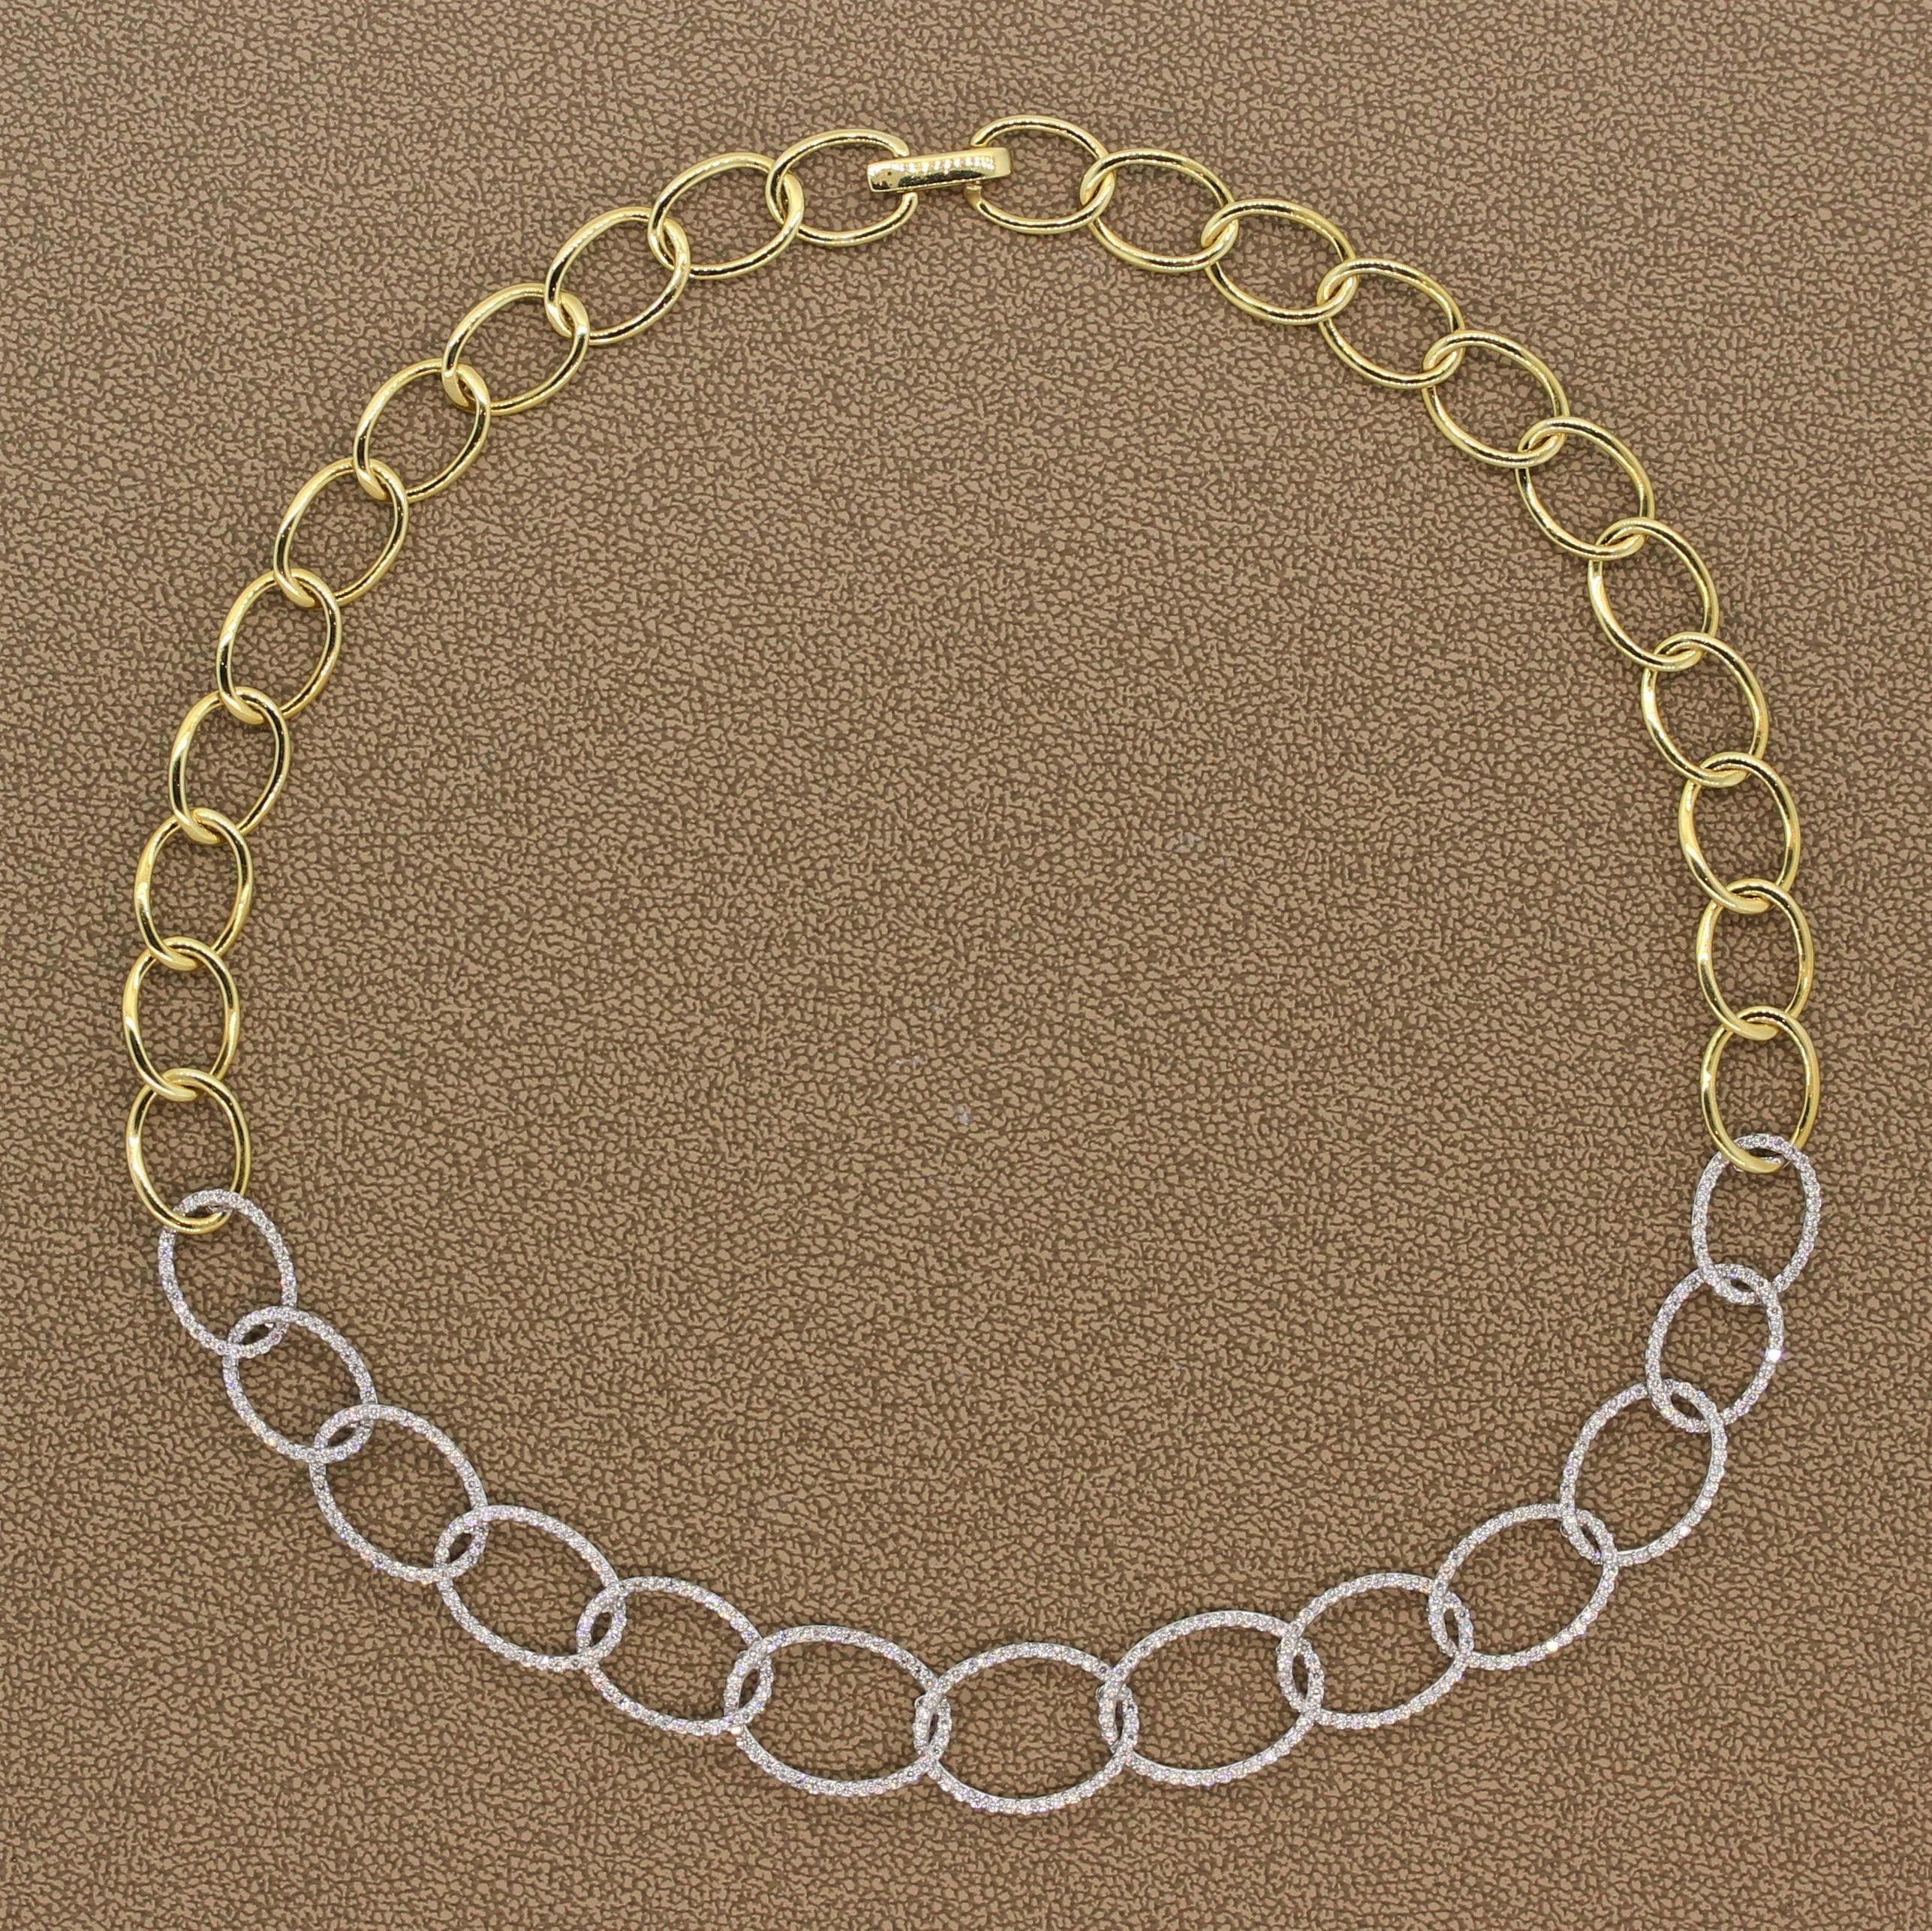 This fun necklace featuring 3.06 carats of VS quality diamonds has great movement. The round cut diamonds are set in graduating 18K white gold oval hoop links with 18K yellow gold oval hoop links connecting the two sides of the necklace. A fun piece